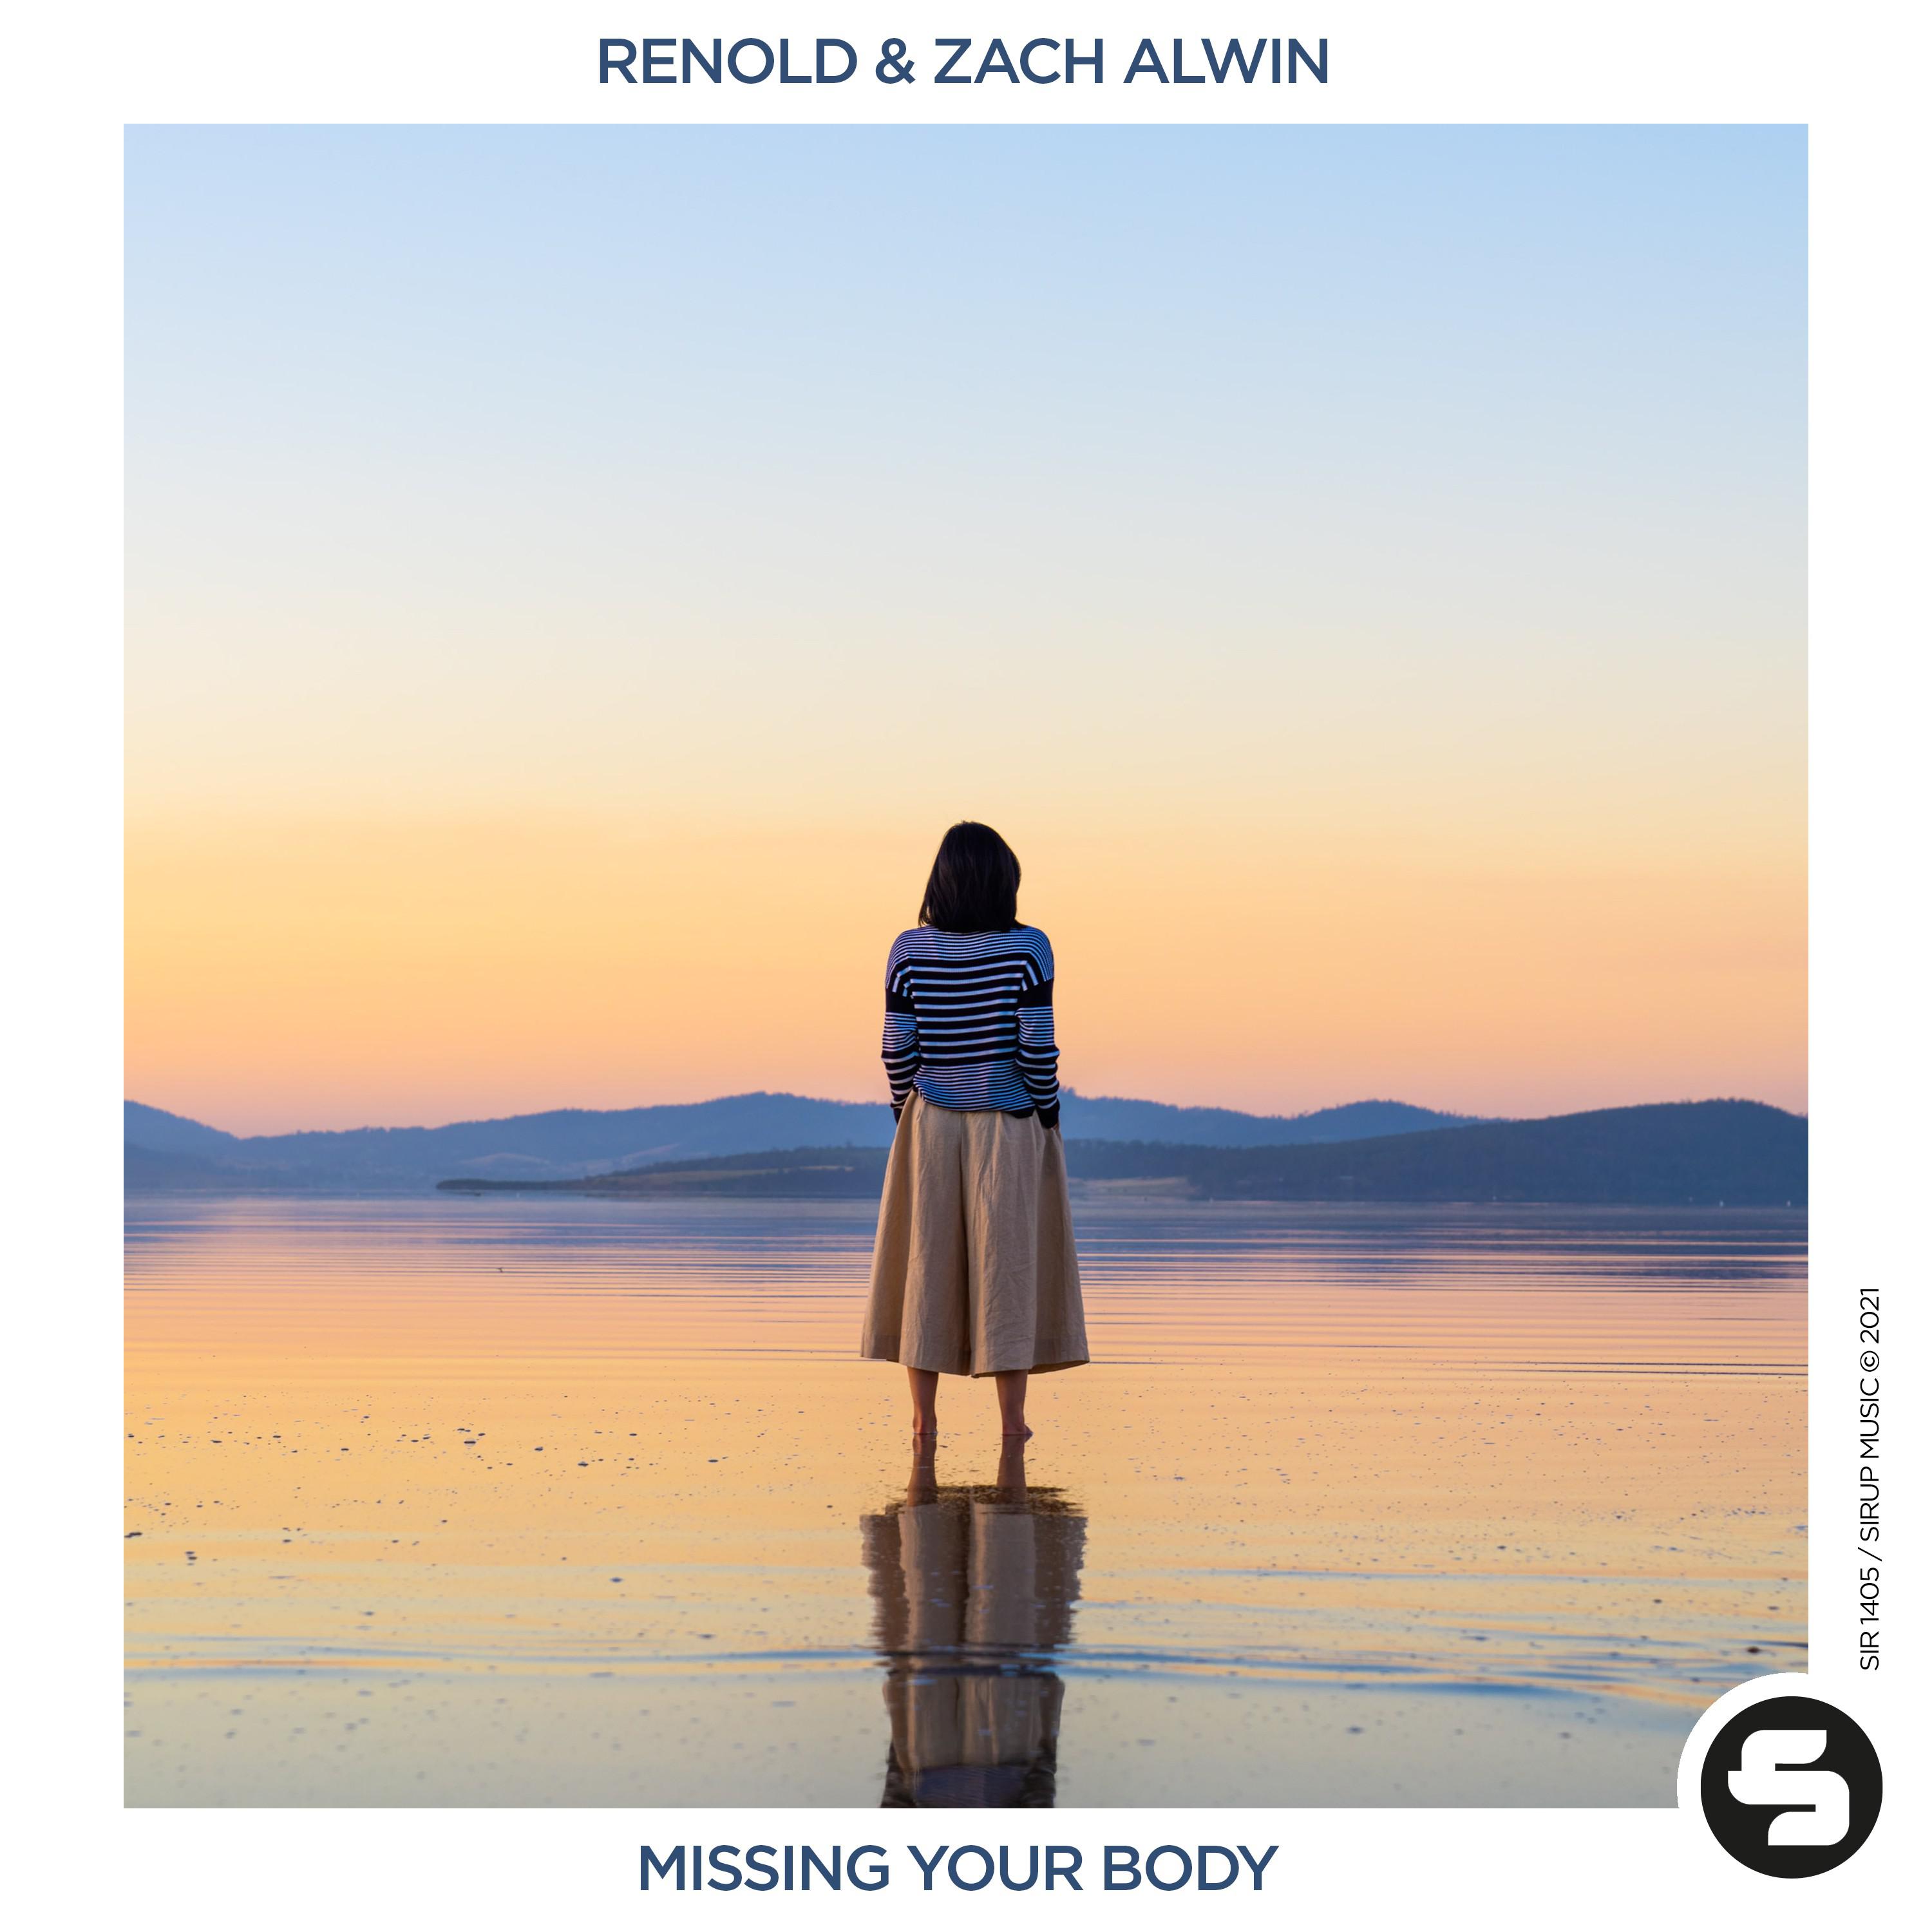 Missing Your Body歌词 歌手RENOLD / Zach Alwin-专辑Missing Your Body-单曲《Missing Your Body》LRC歌词下载